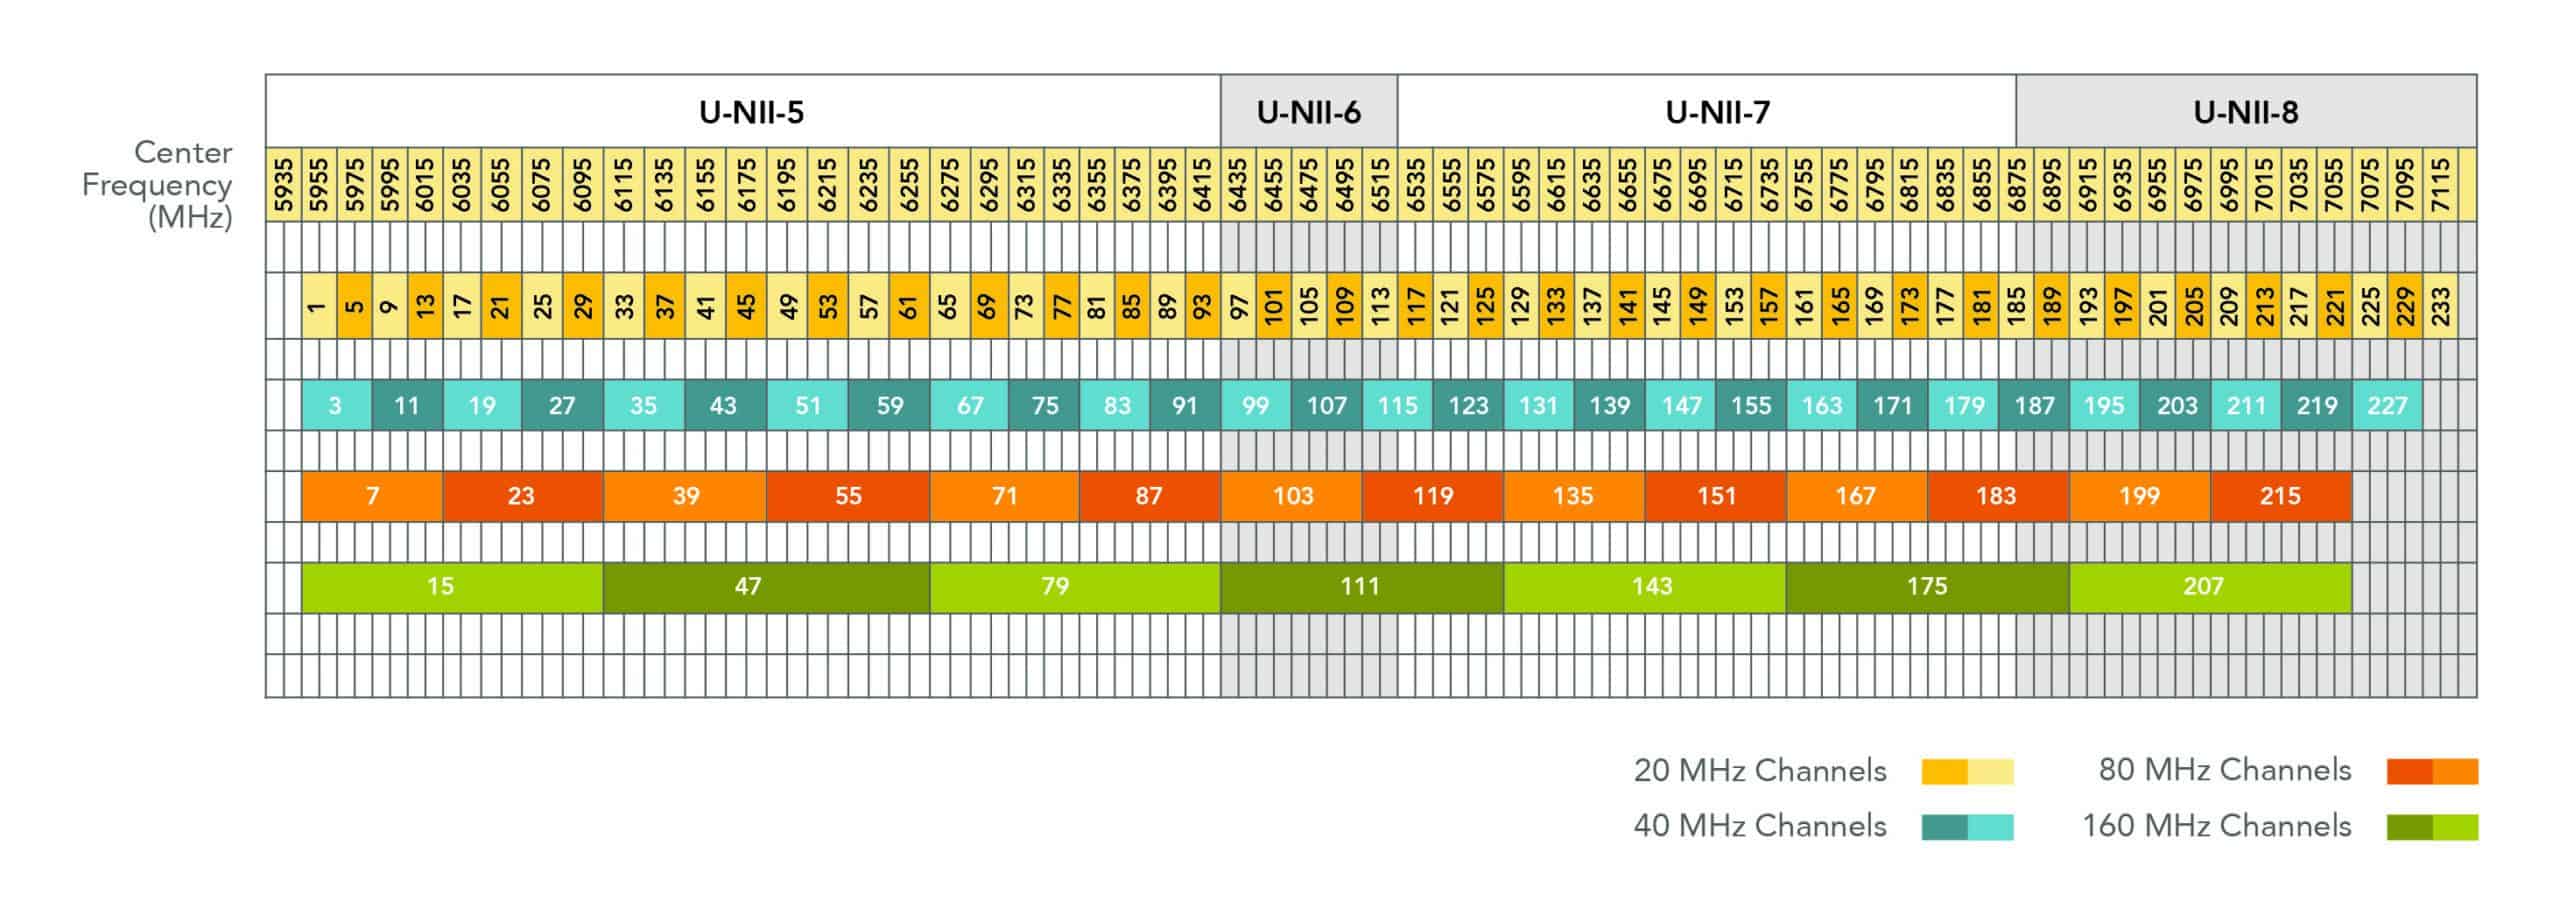 What is 6 Mhz channel?